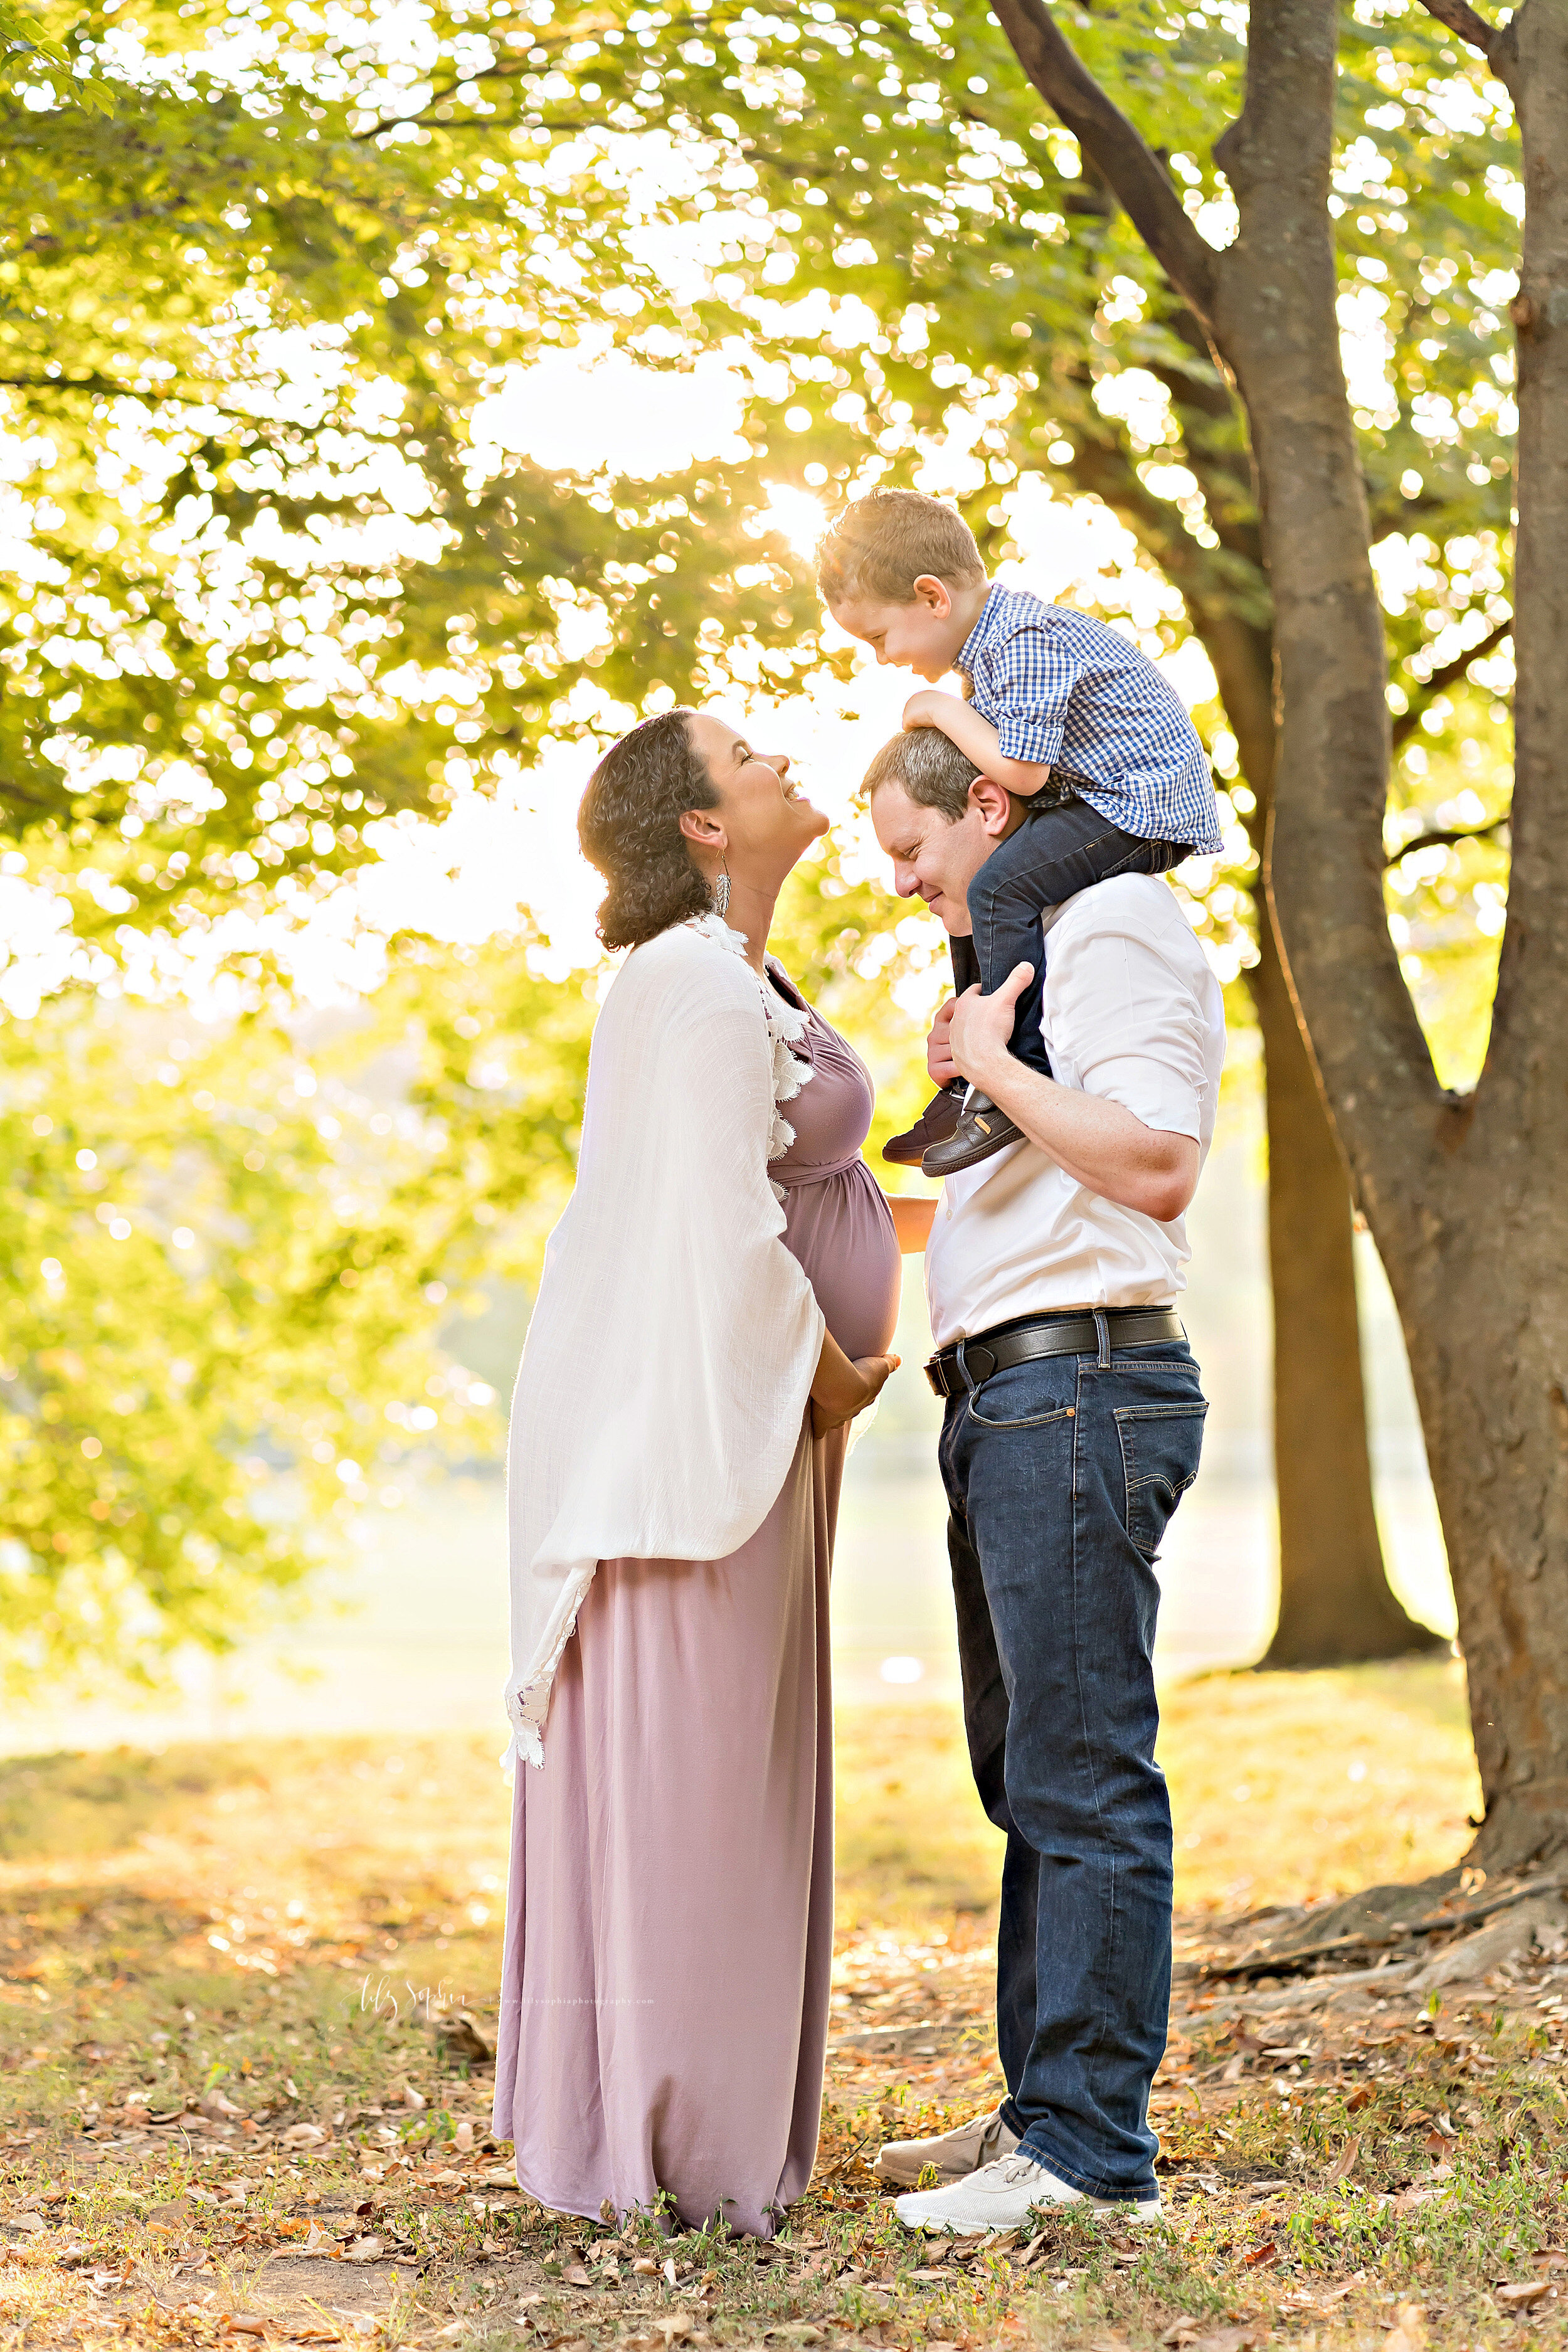 atlanta-decatur-old-fourth-ward-poncey-highlands-candler-park-grant-park-brookhaven-buckhead-virginia-highlands-west-end-decatur-lily-sophia-photography-family-maternity-park-session_2406.jpg